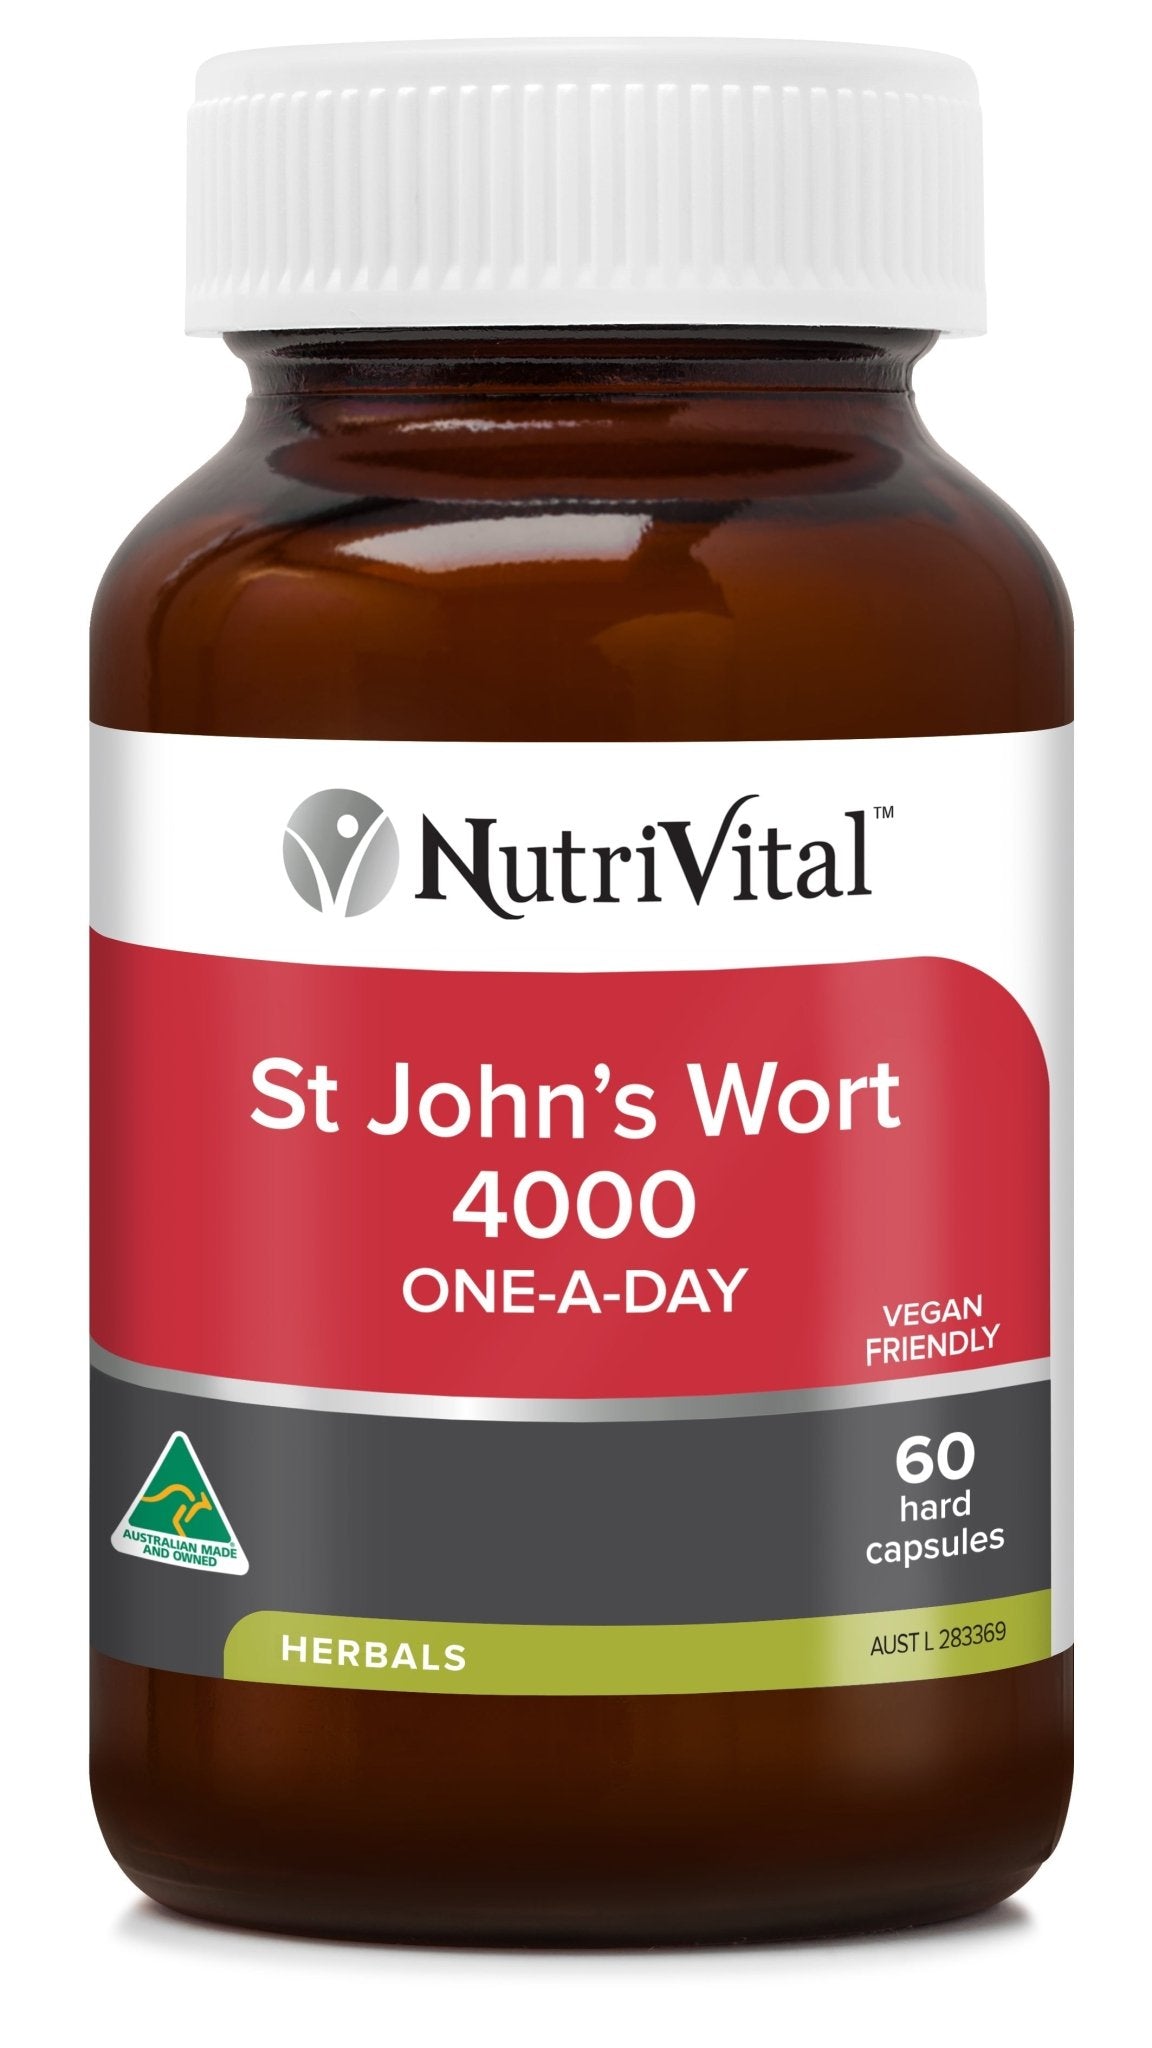 NutriVital St John's Wort 4000 One-A-Day Capsules 60 Capsules - Dr Earth - Supplements, Nutrivital